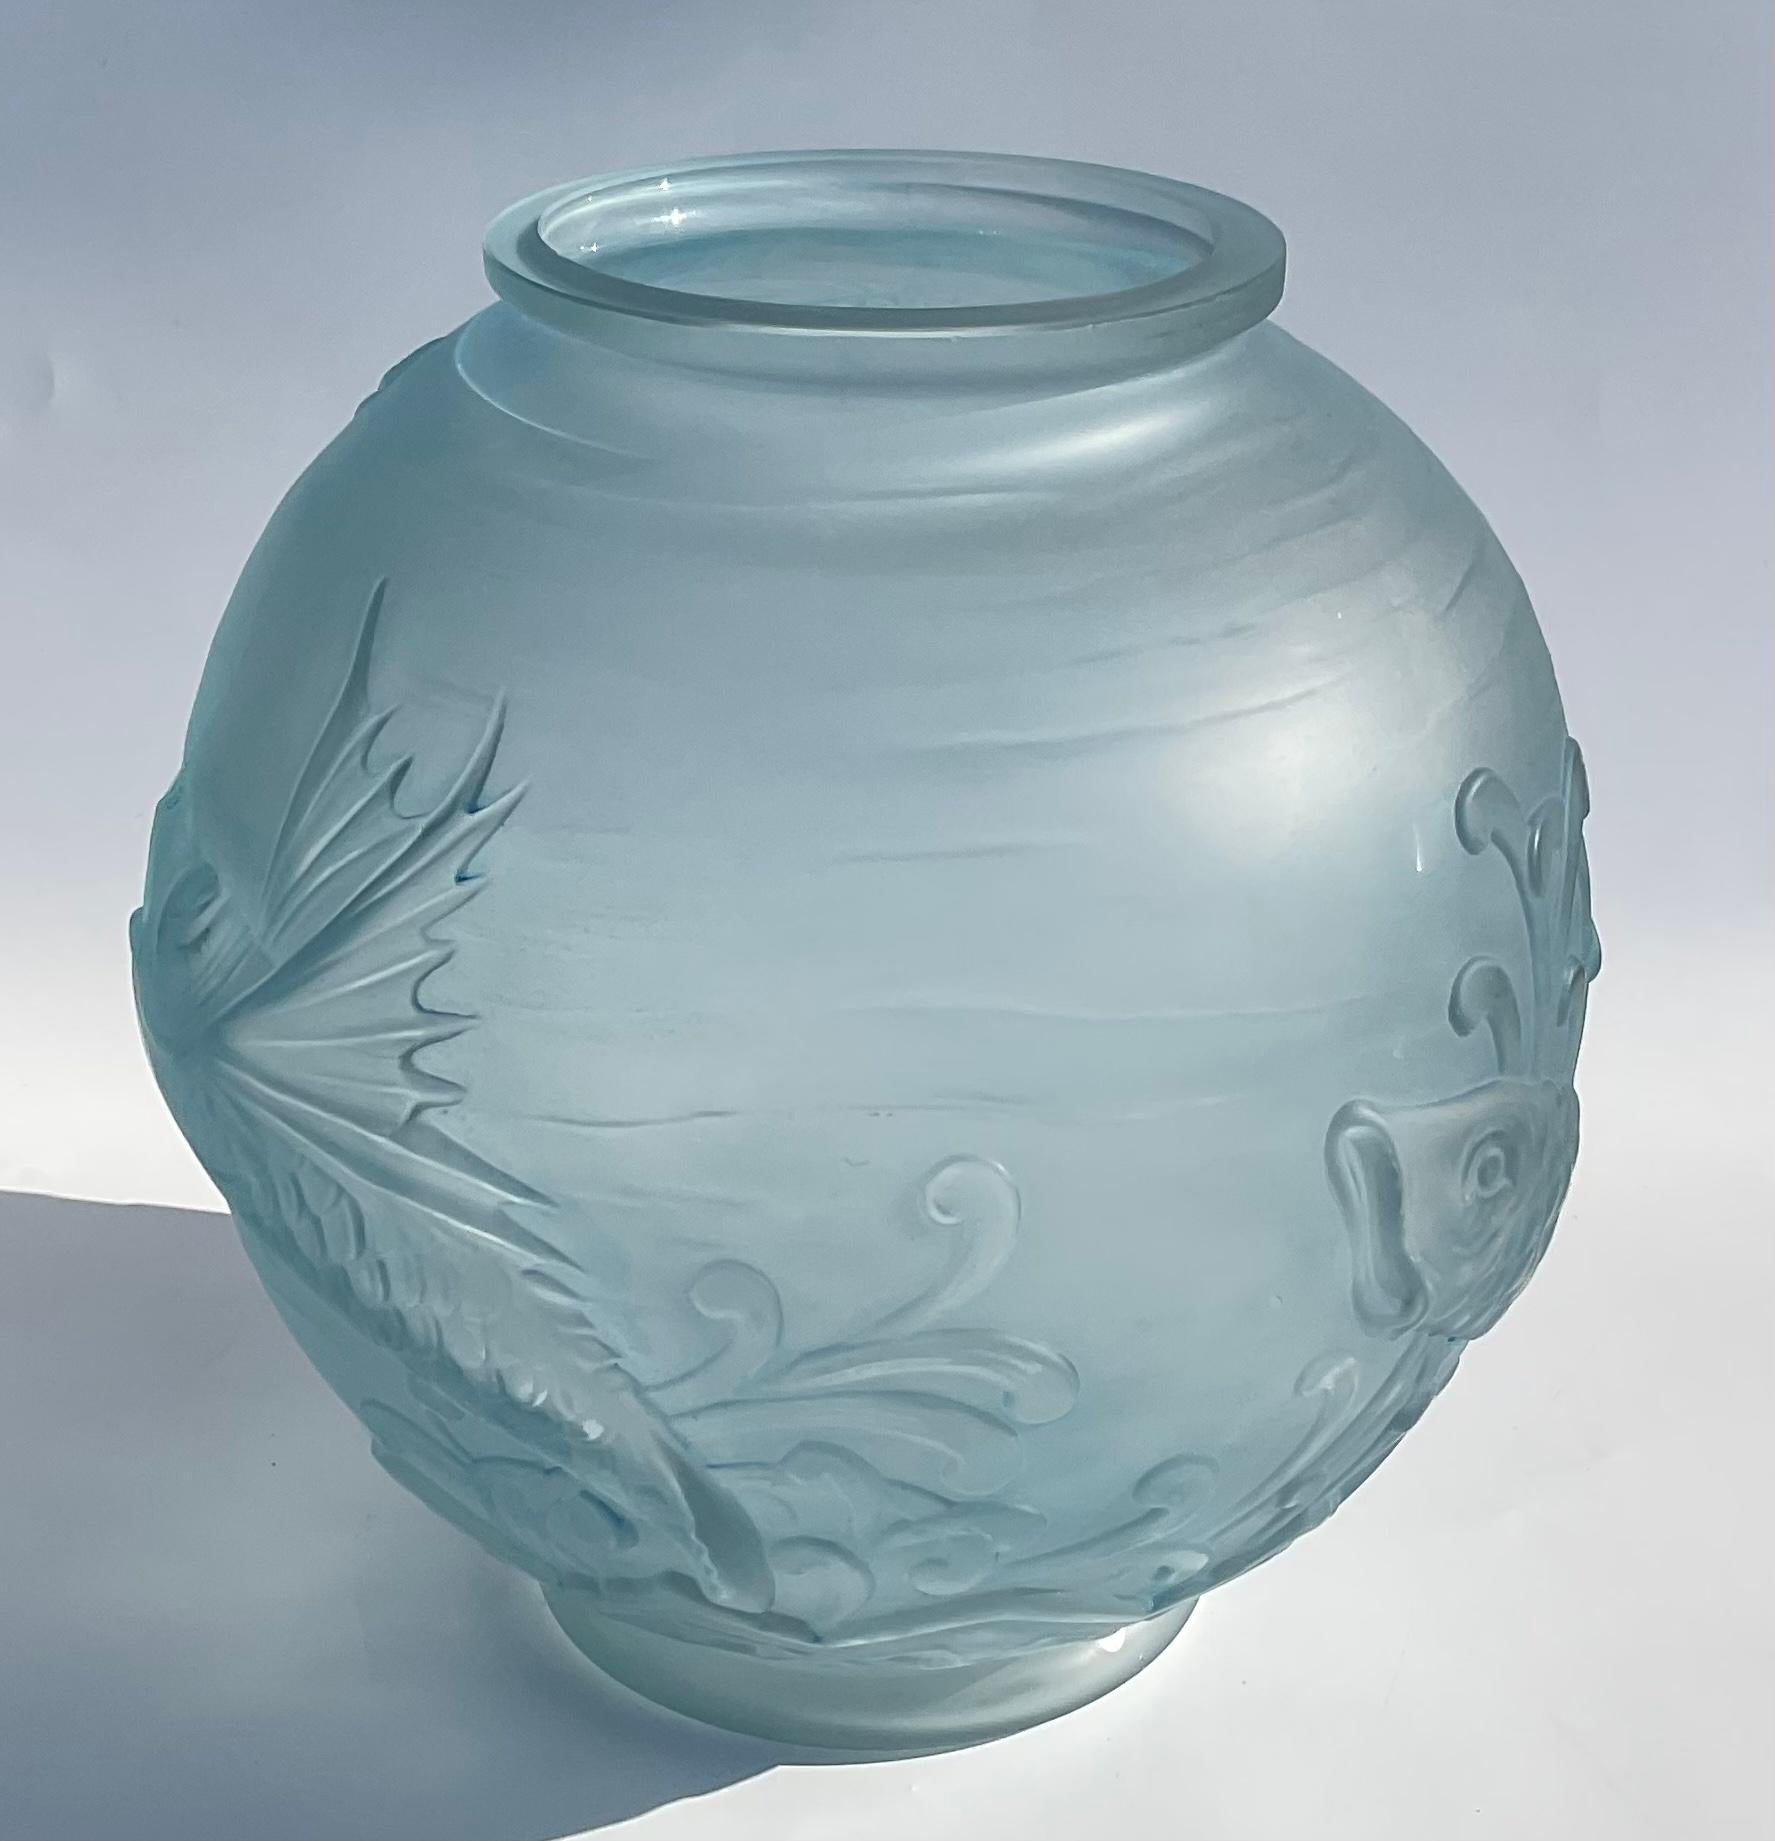 Art Glass Large Pierre D’avesn Large French Art Deco Flying Fish Vase circa 1930s Blue For Sale